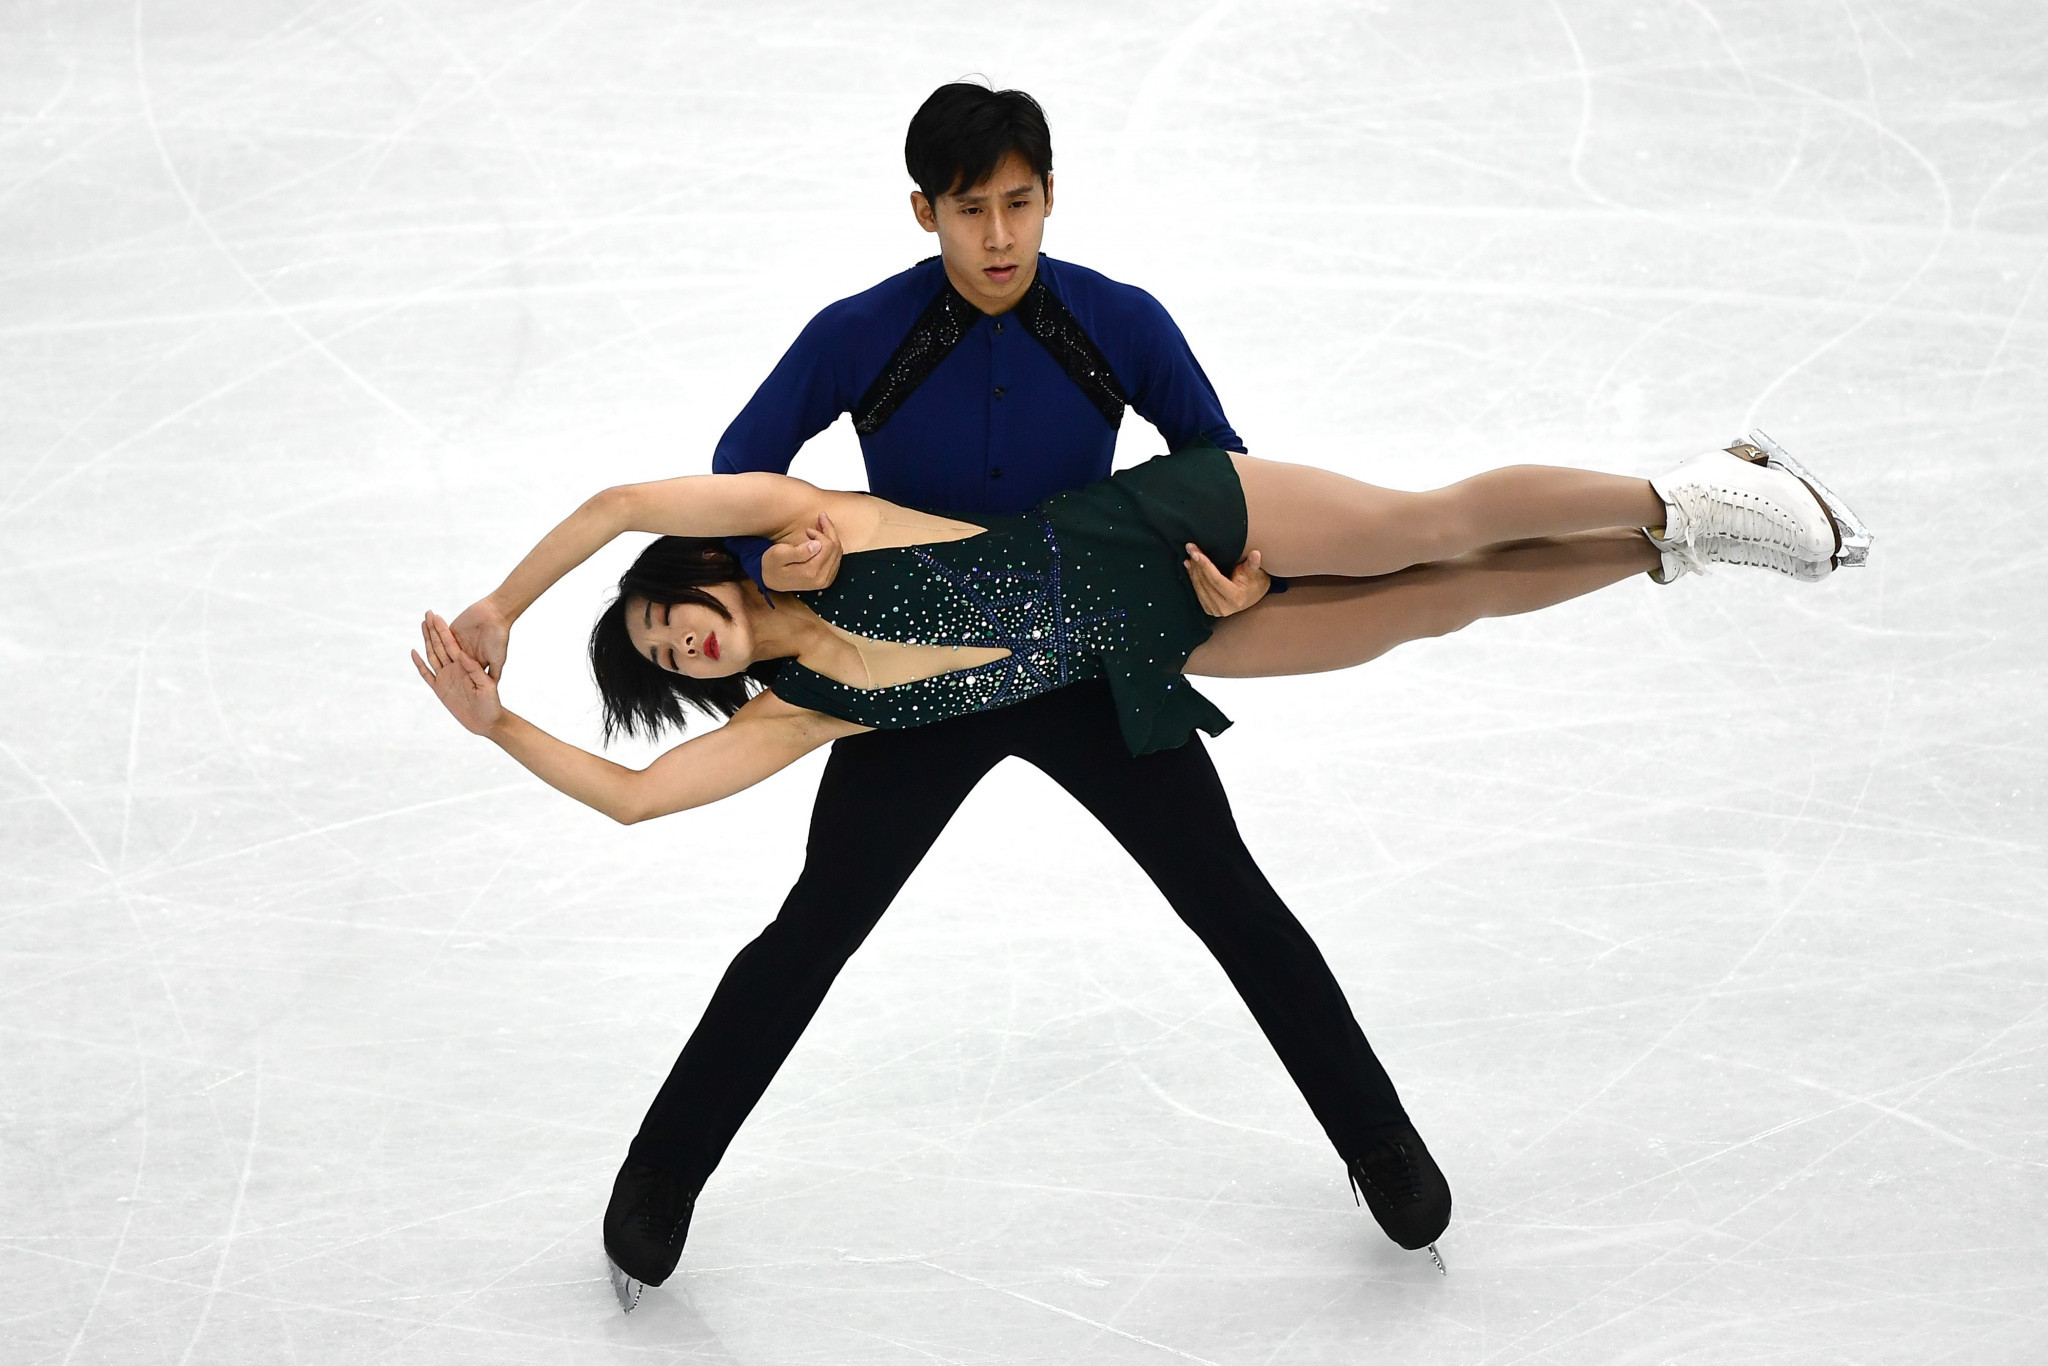 Wenjing Sui and Cong Han will aim for a sixth pairs title ©Getty Images